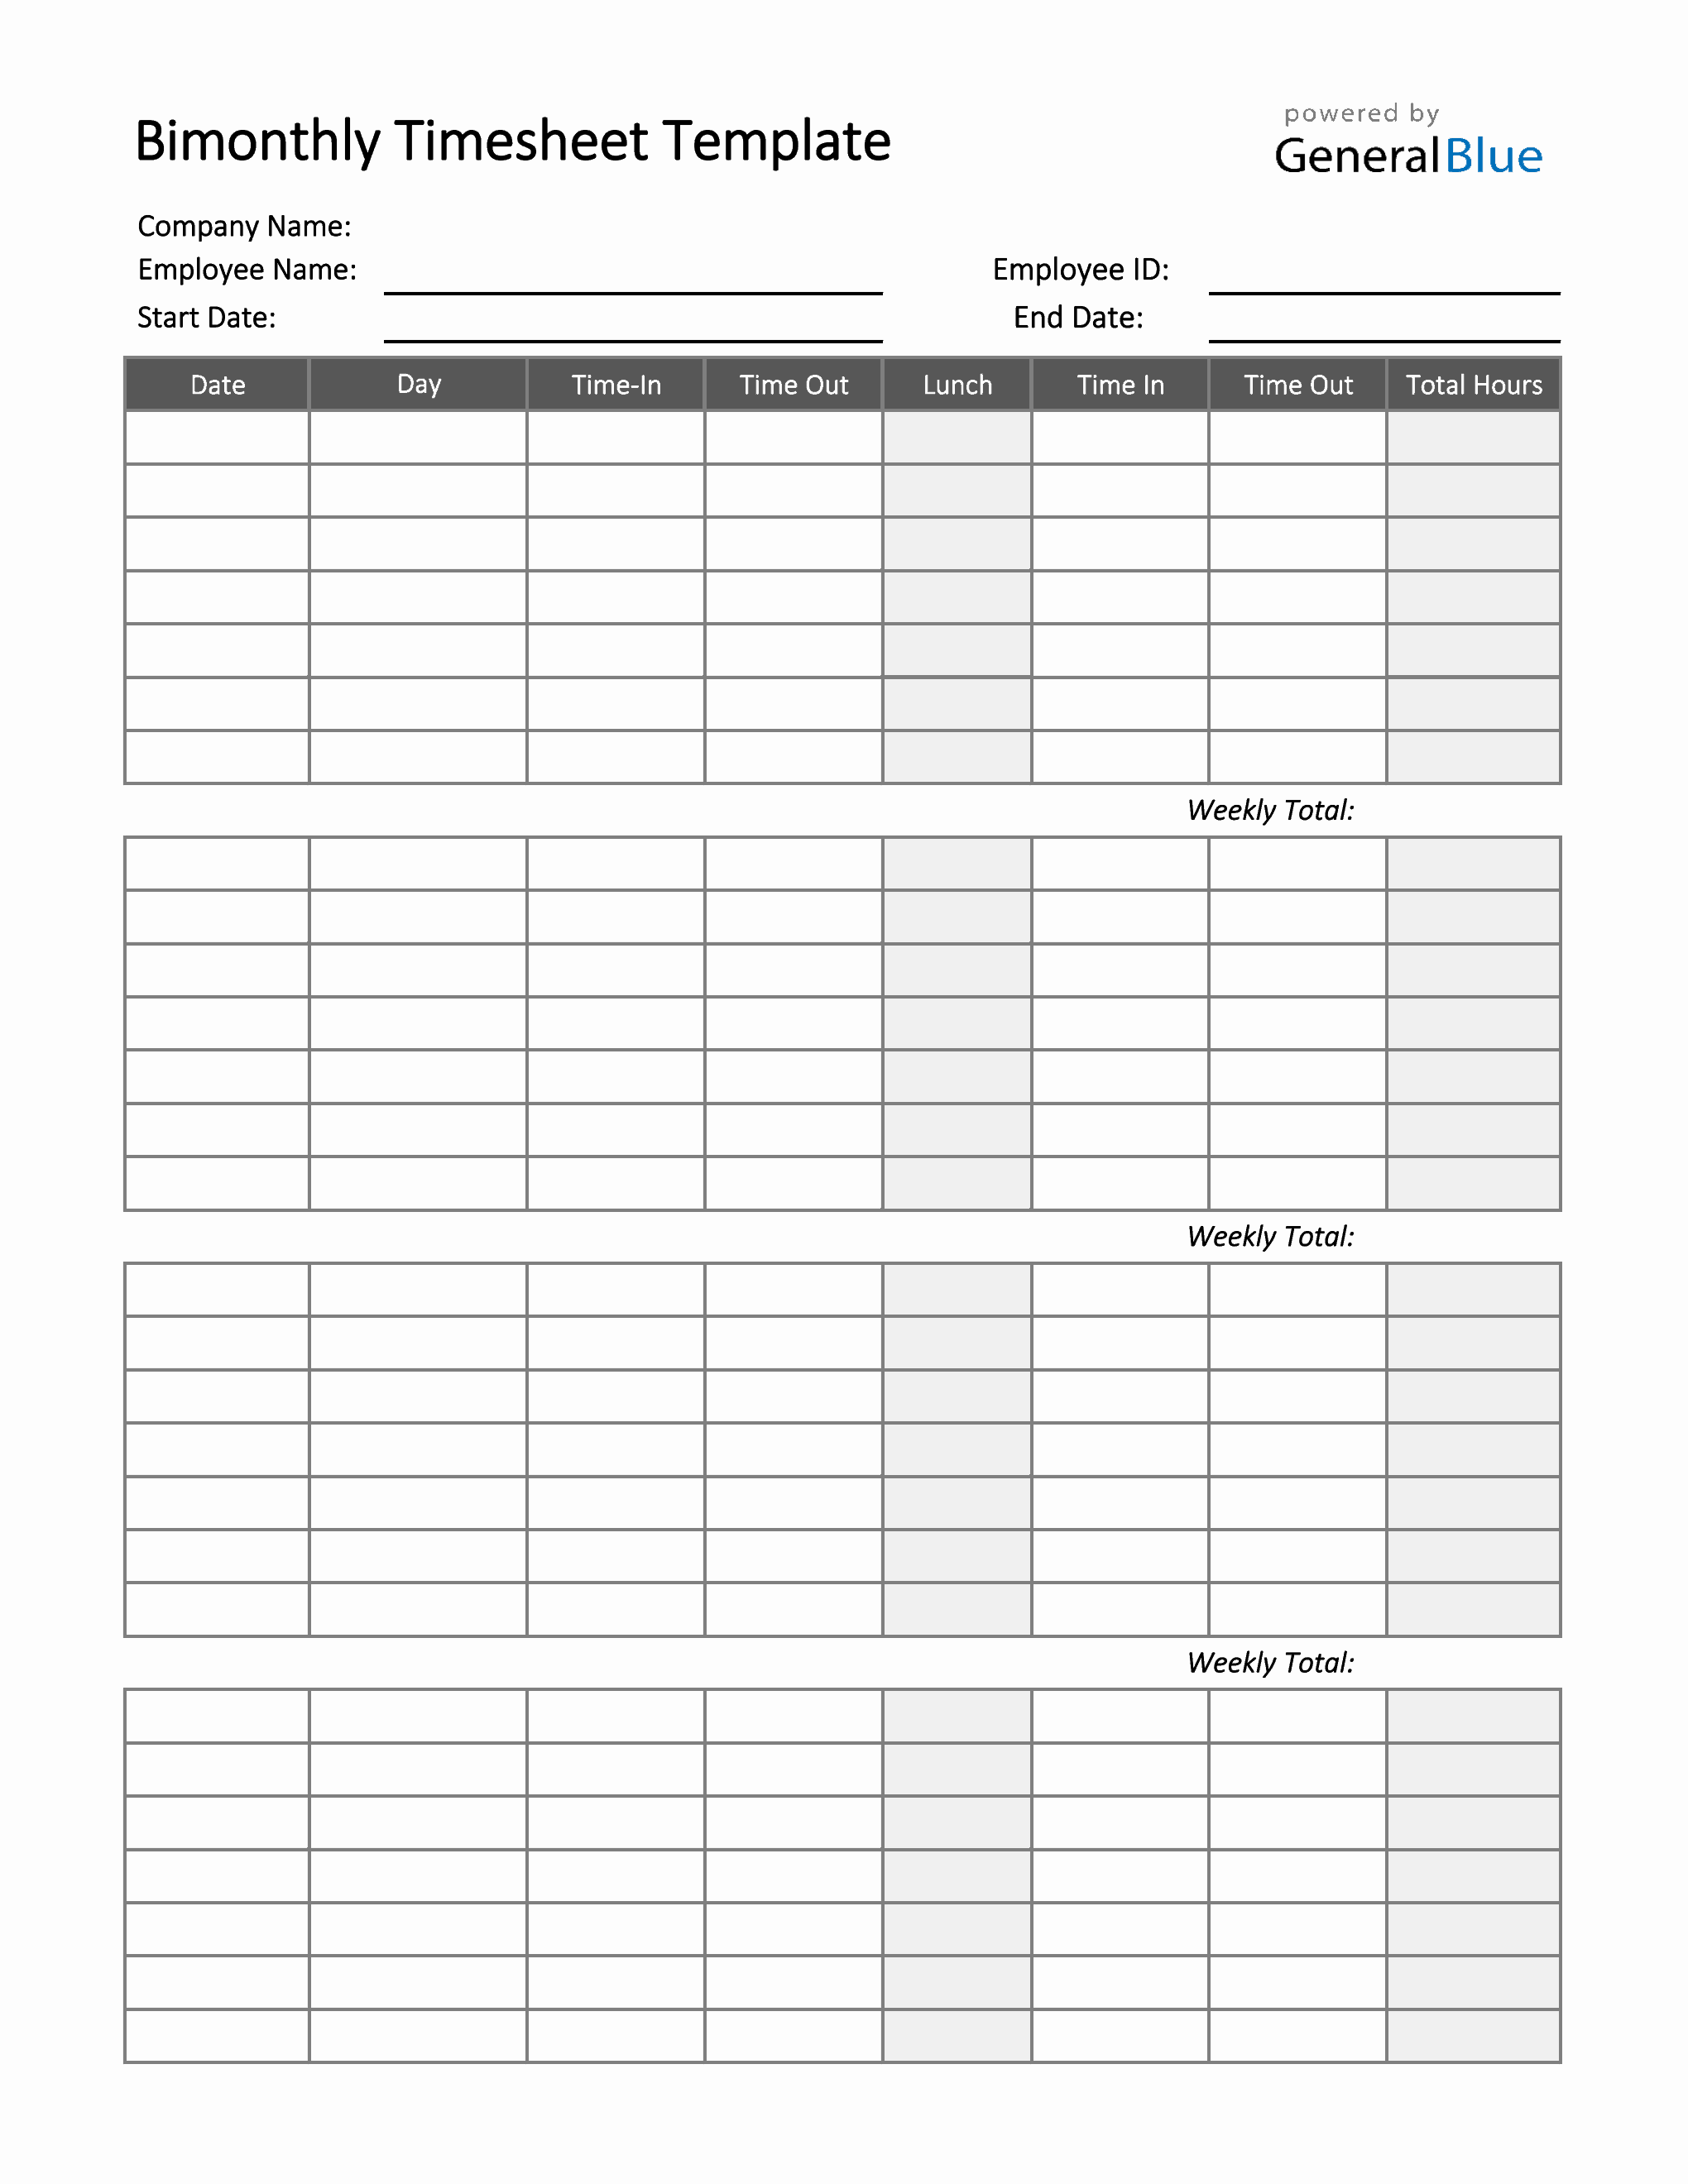 Bimonthly Timesheet Template In Excel